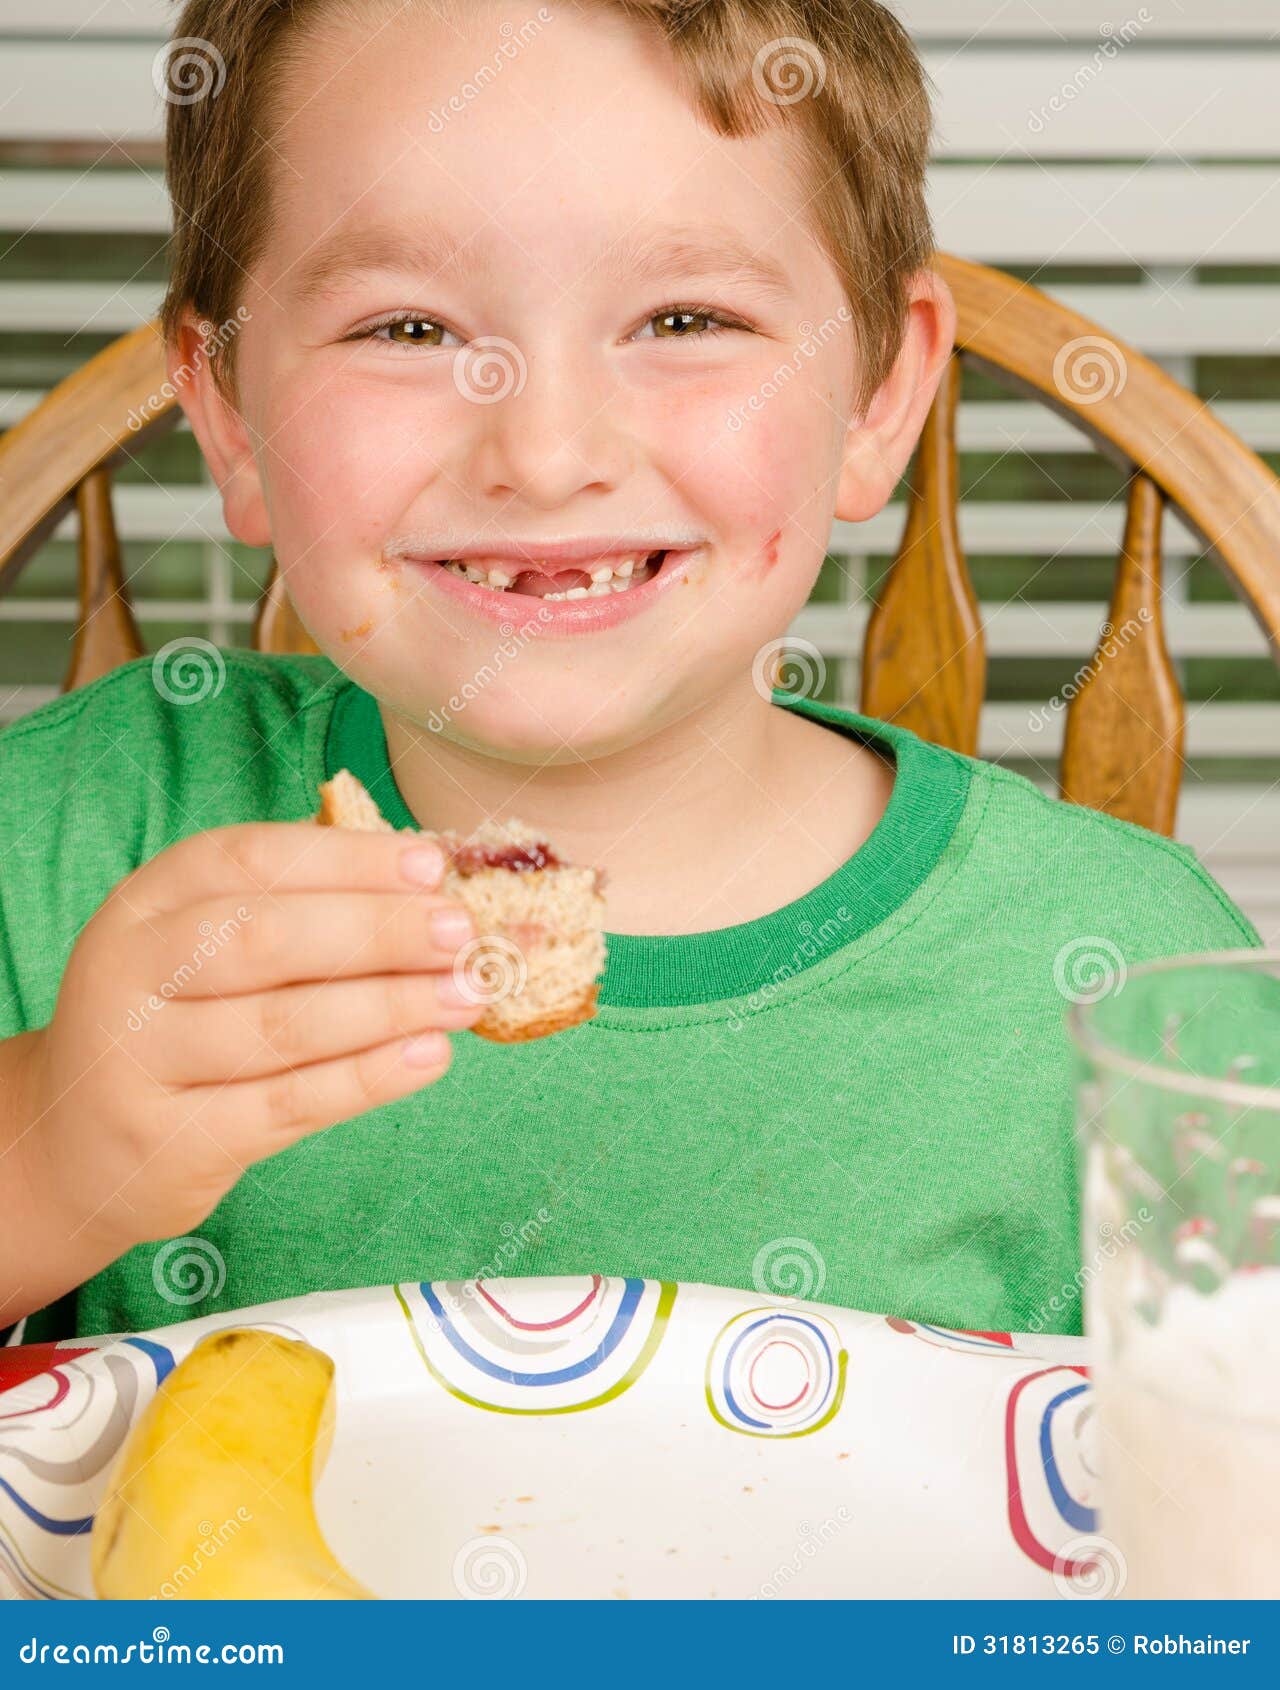 Child Eating Messy Peanut Butter And Jelly Sandwich Stock Image